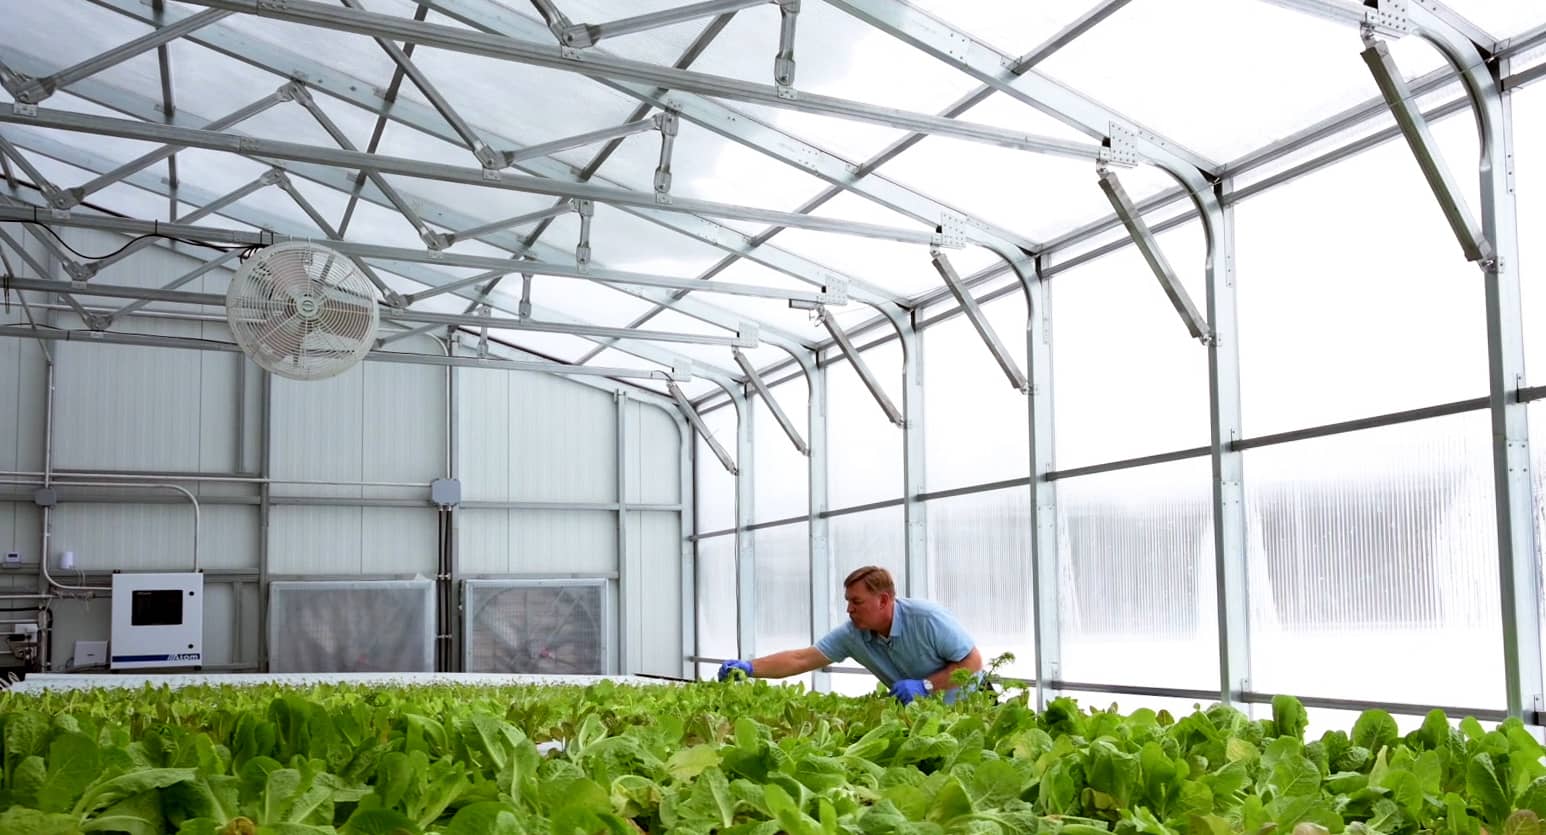 4 Top Considerations When Selecting a Greenhouse Covering